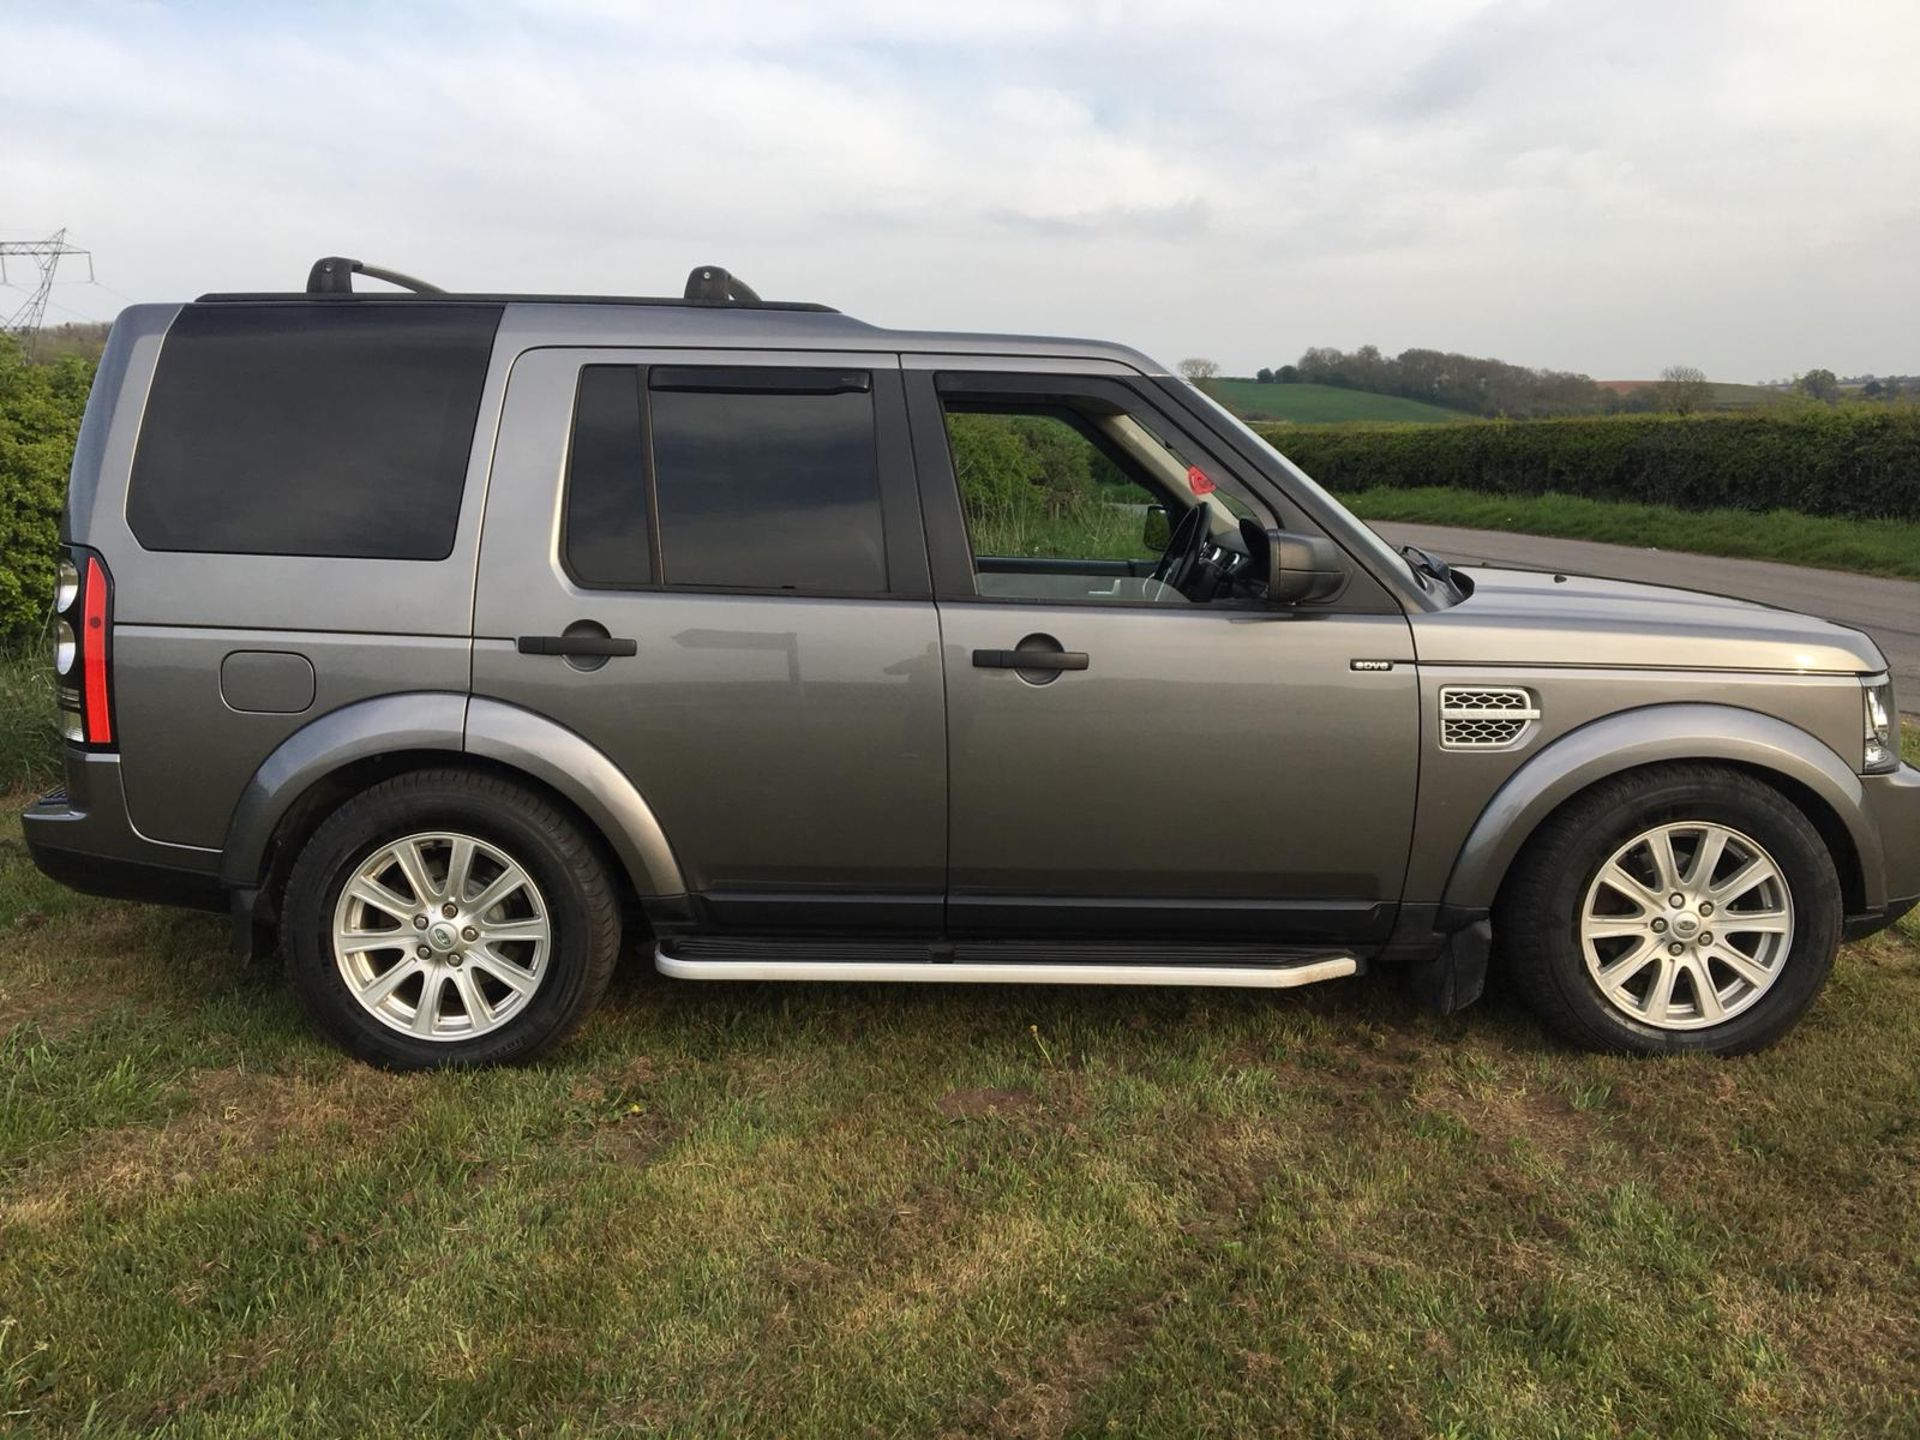 2007/07 REG LAND ROVER DISCOVERY 3 TDV6 SE AUTOMATIC 2.7 DIESEL 4X4, 7 SEAT FACELIFT LIGHTS *NO VAT* - Image 9 of 16